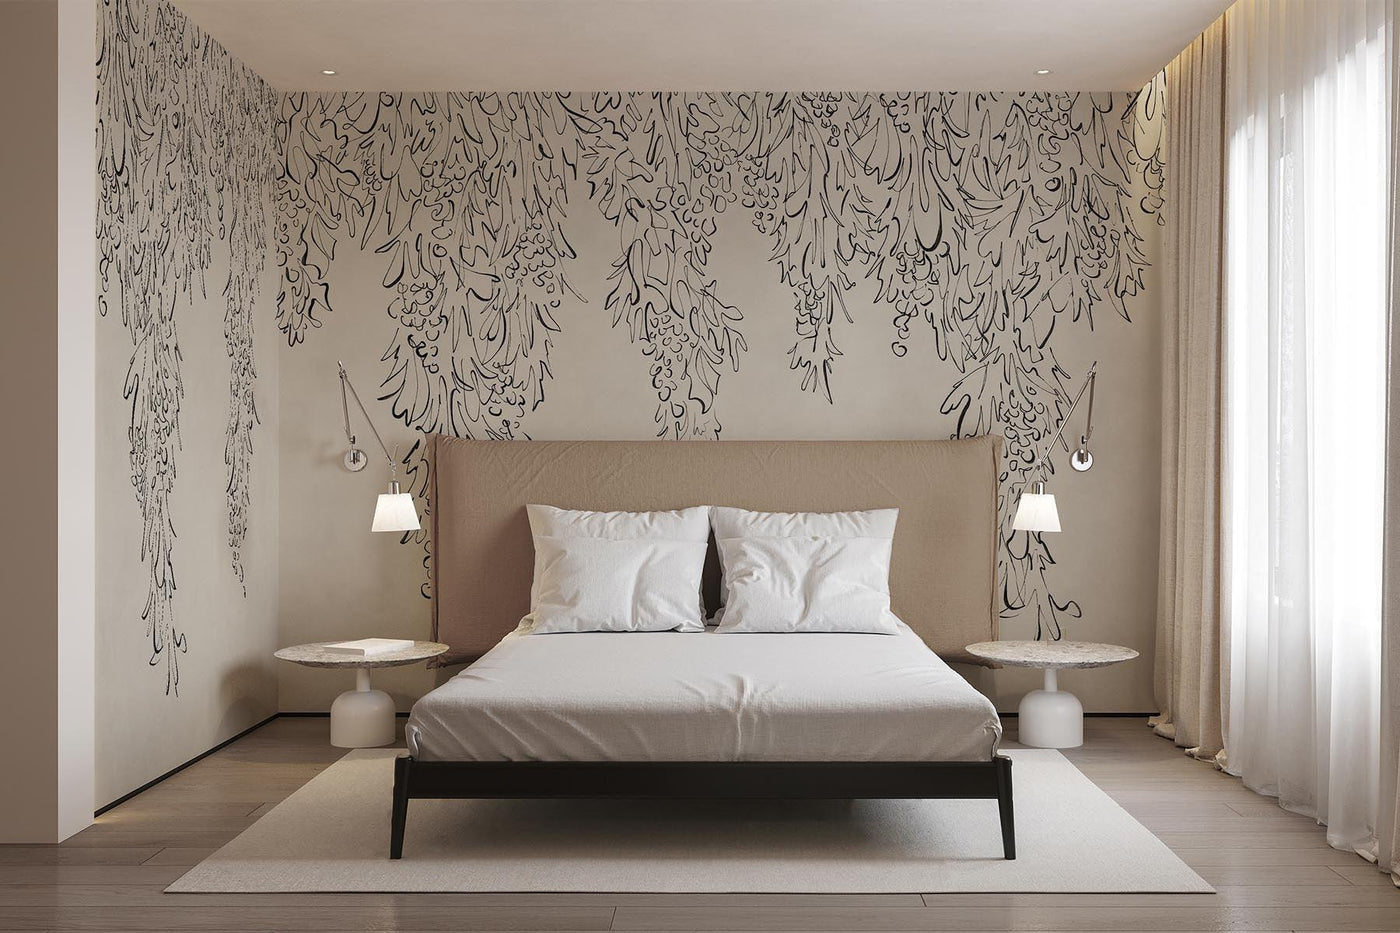 grapevine wall mural on the walls of this minimalistic and neutral bedroom. . Round light beige night stands with a small white lamp on it. Light beige rug on the light wooden floor. Simple white curtains